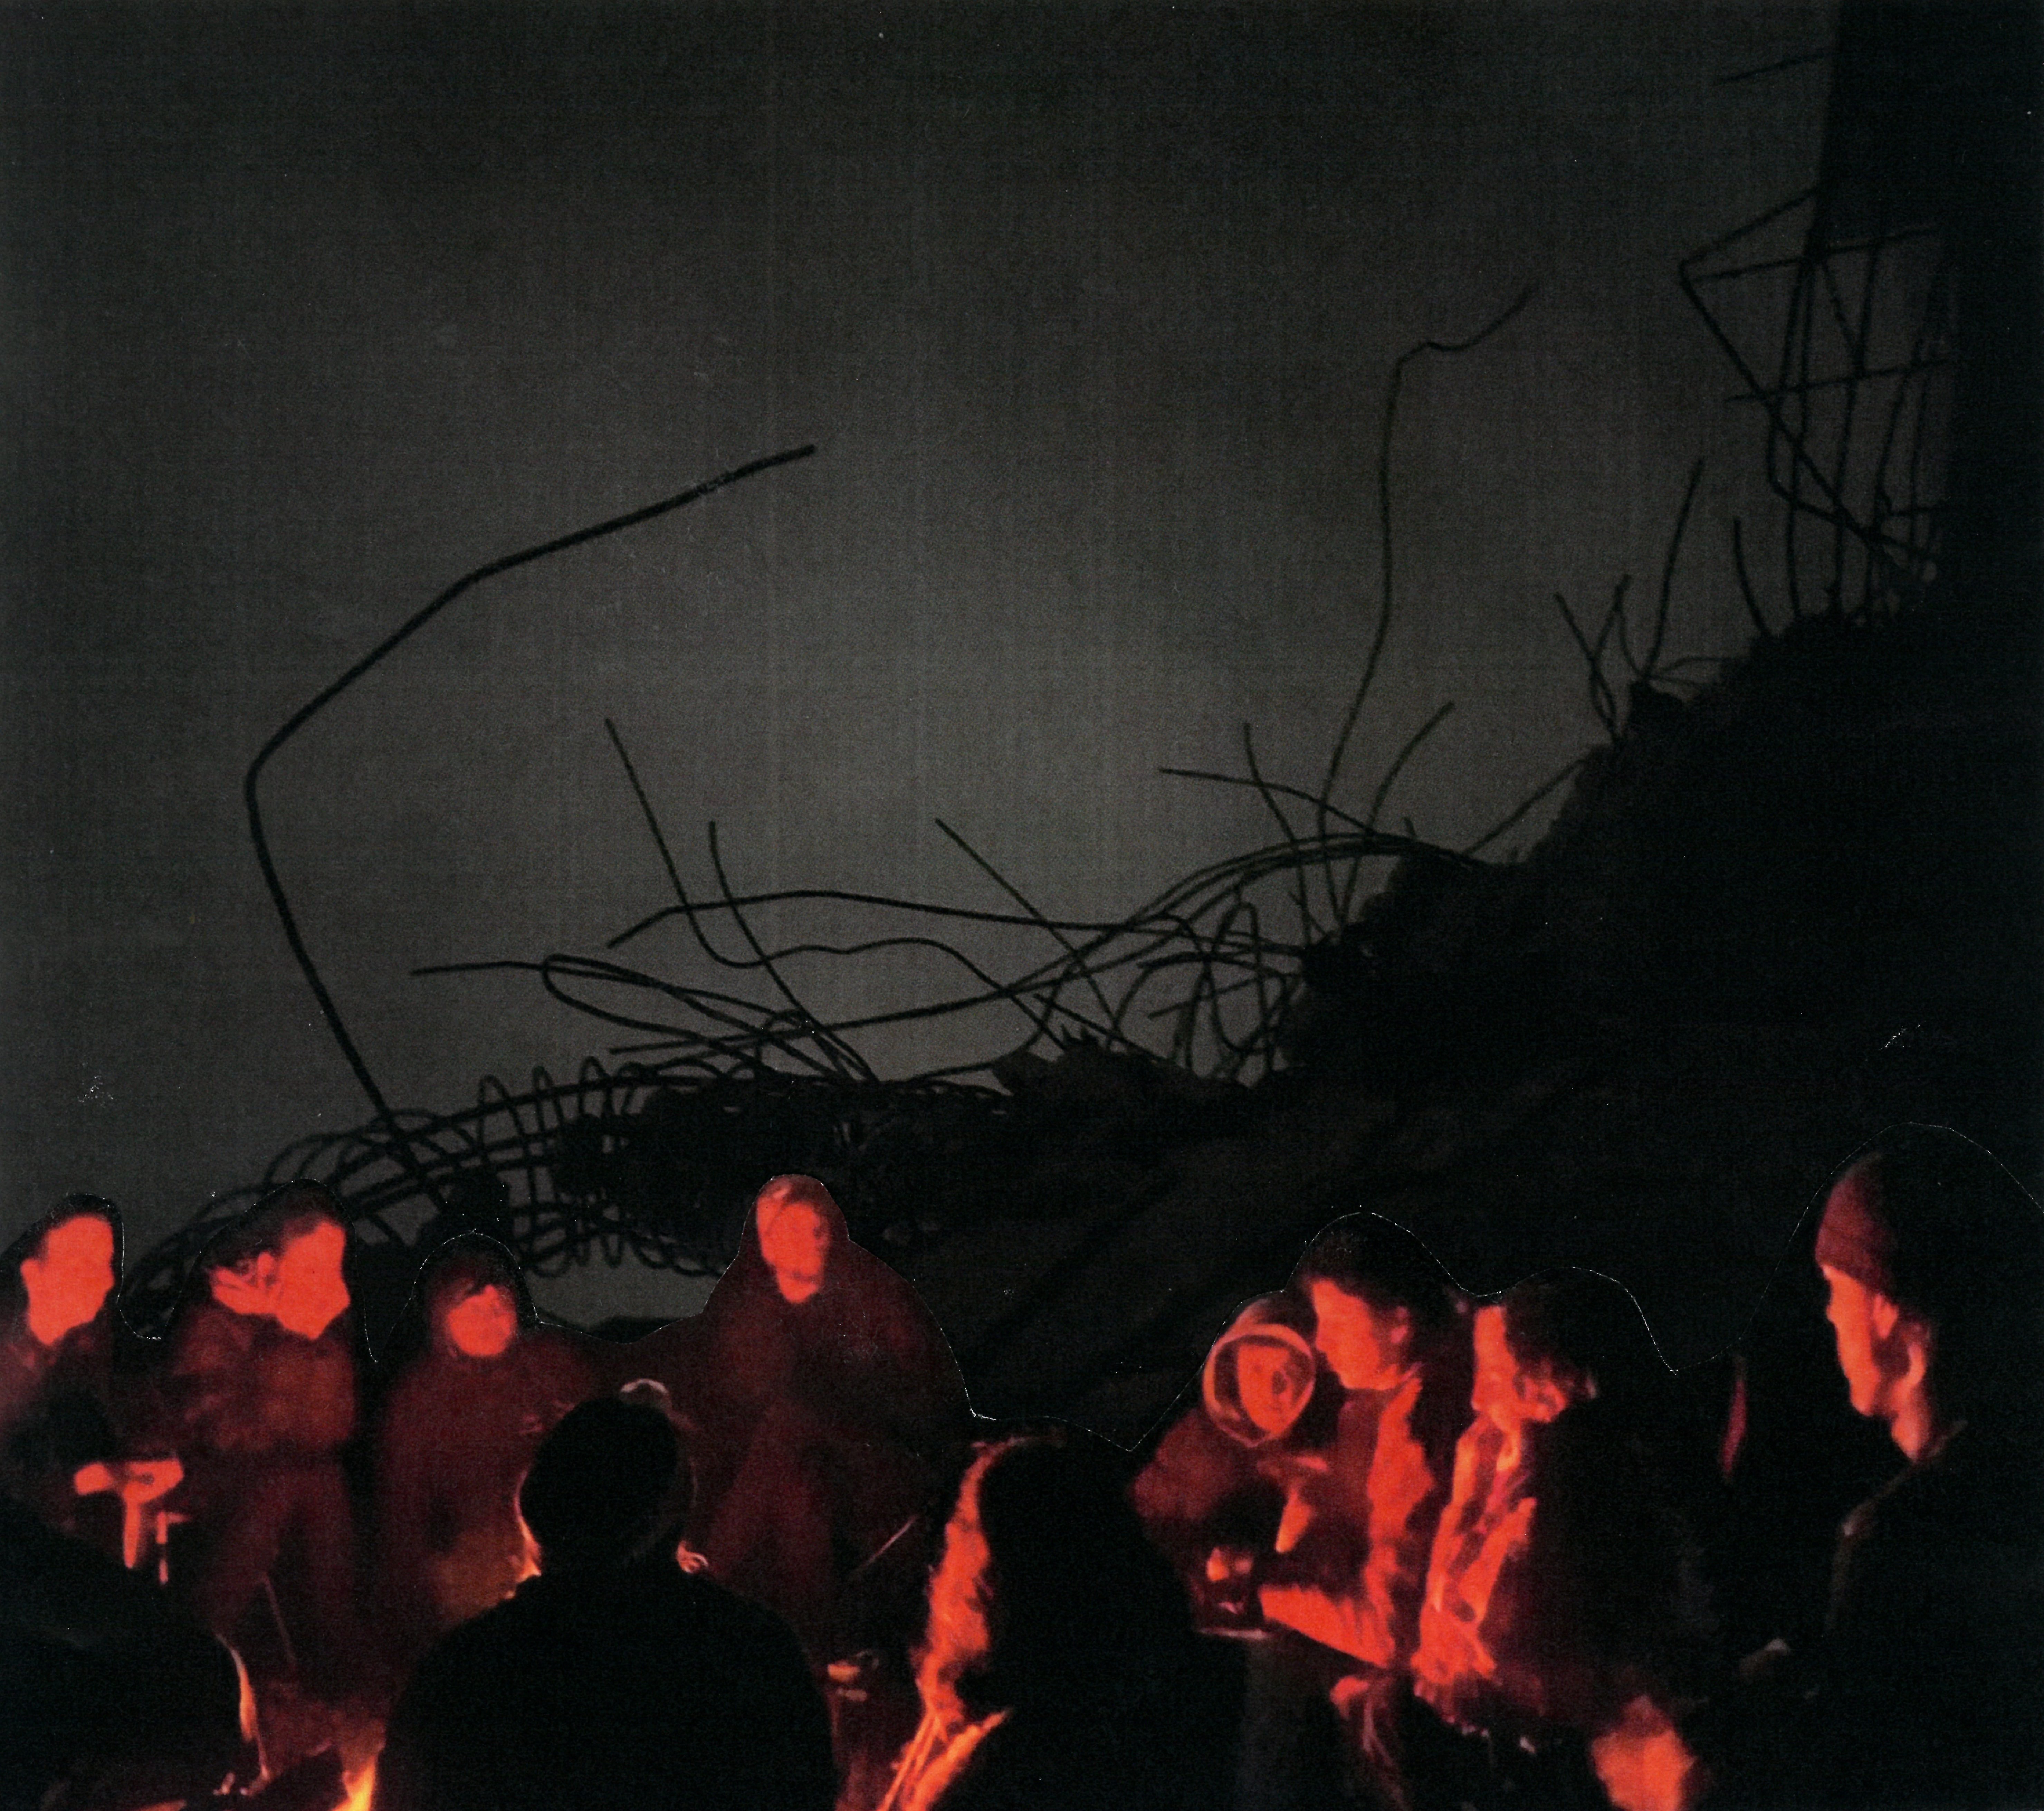 A group gathers around a fire. Behind them, a dark tangle of twisted rebar.